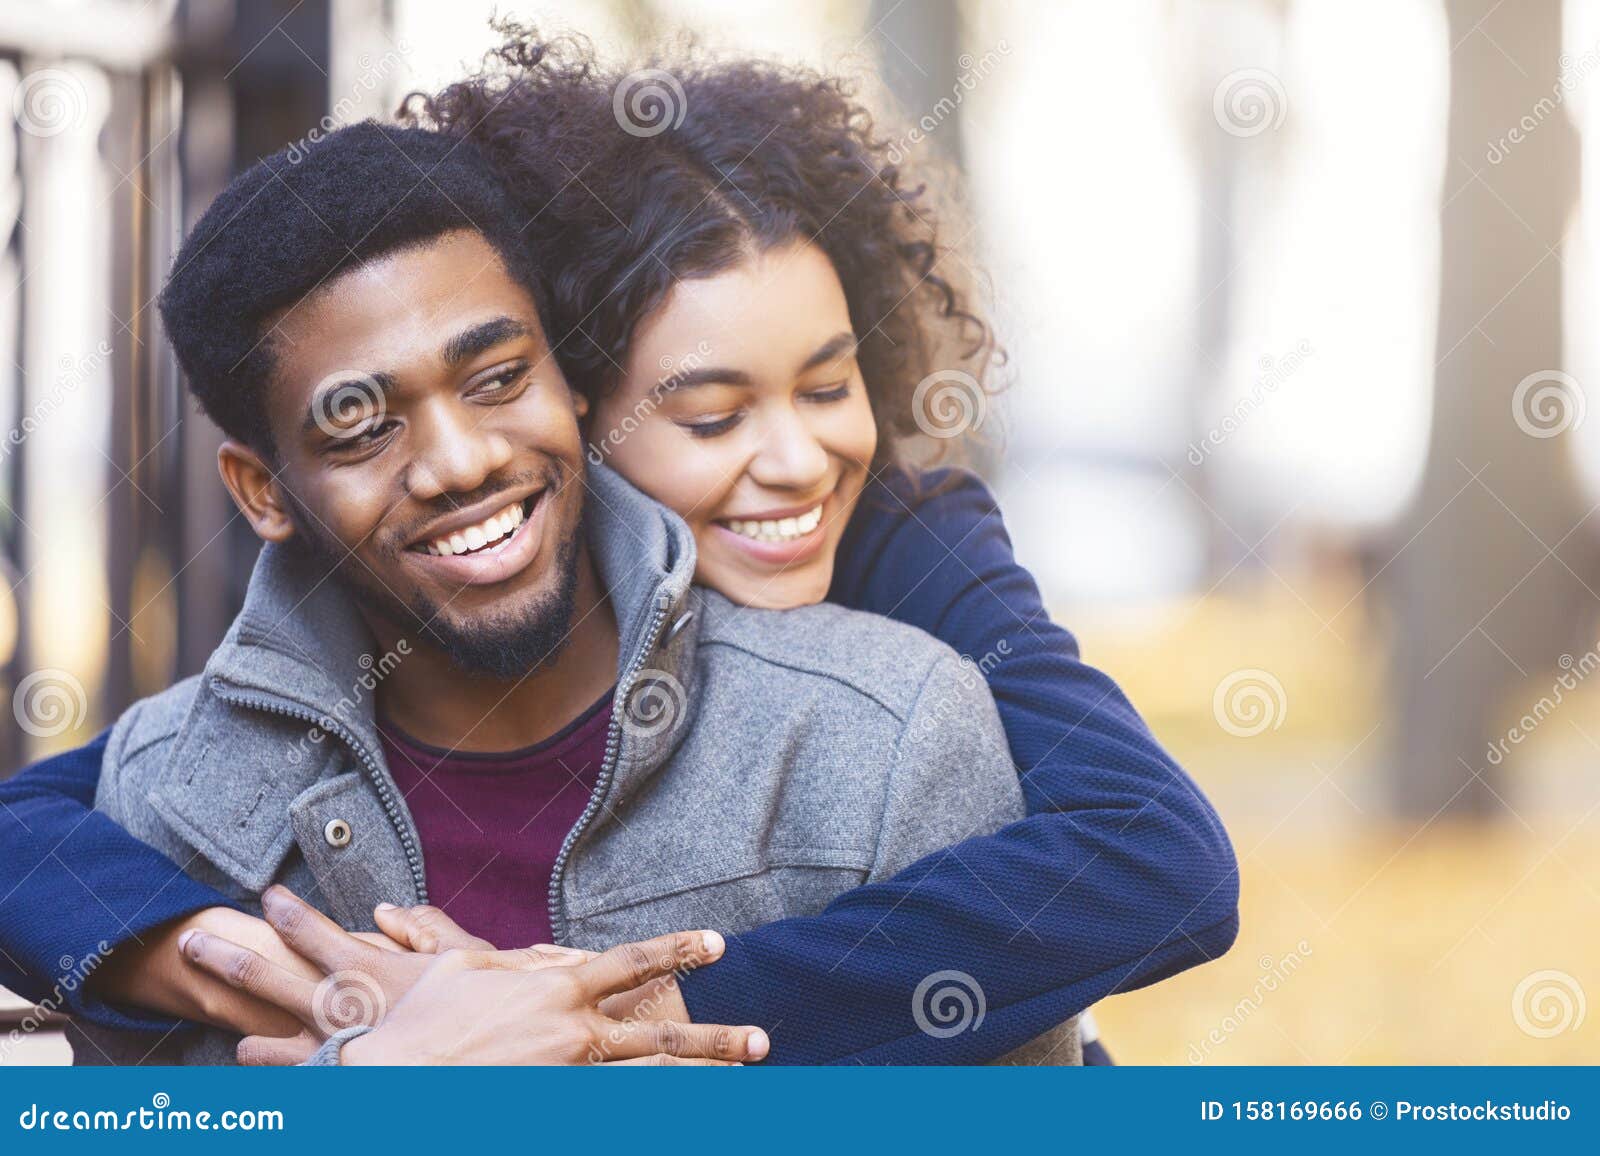 lovely black couple cuddling while date in autumn park